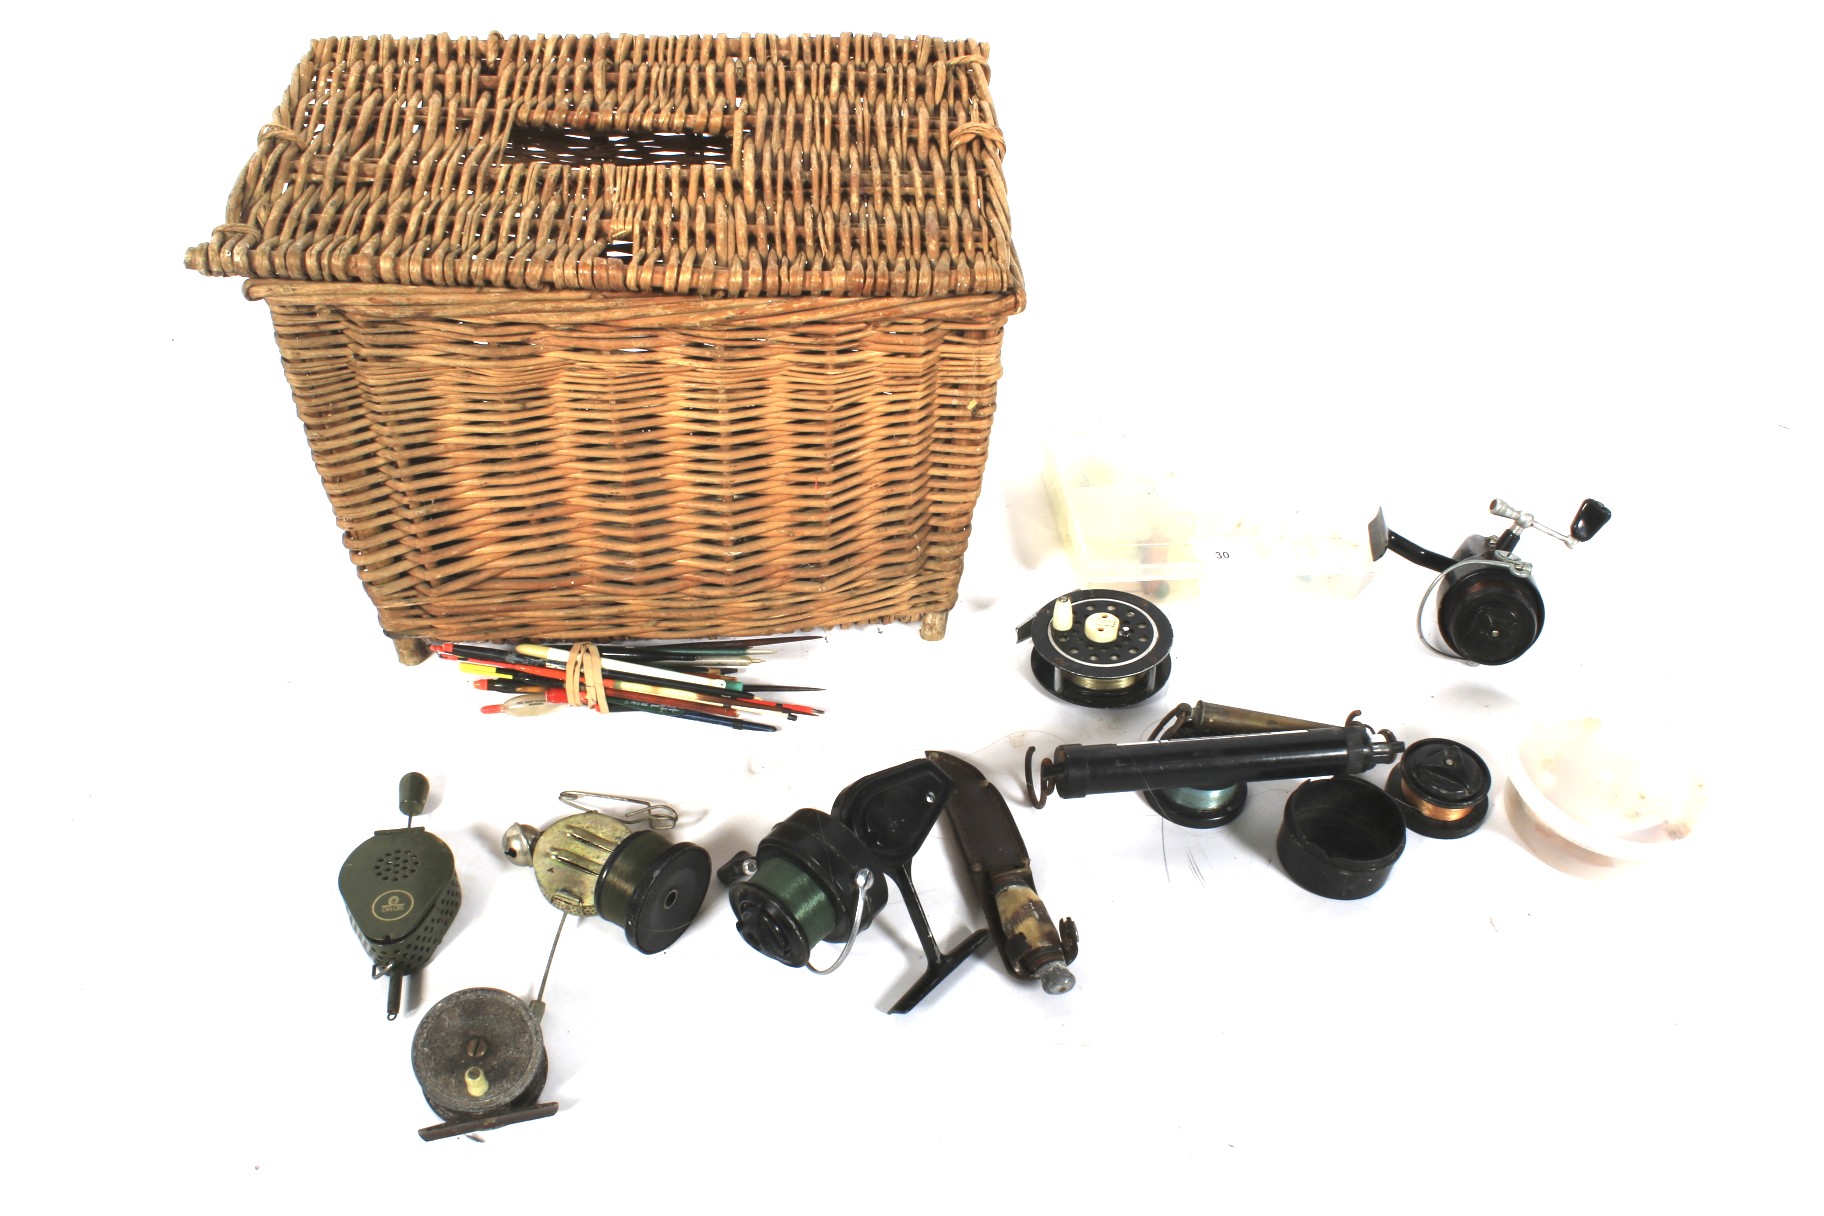 A square wicker basket containing fishing equipment. Including reels, hooks, floats, etc. - Image 2 of 2